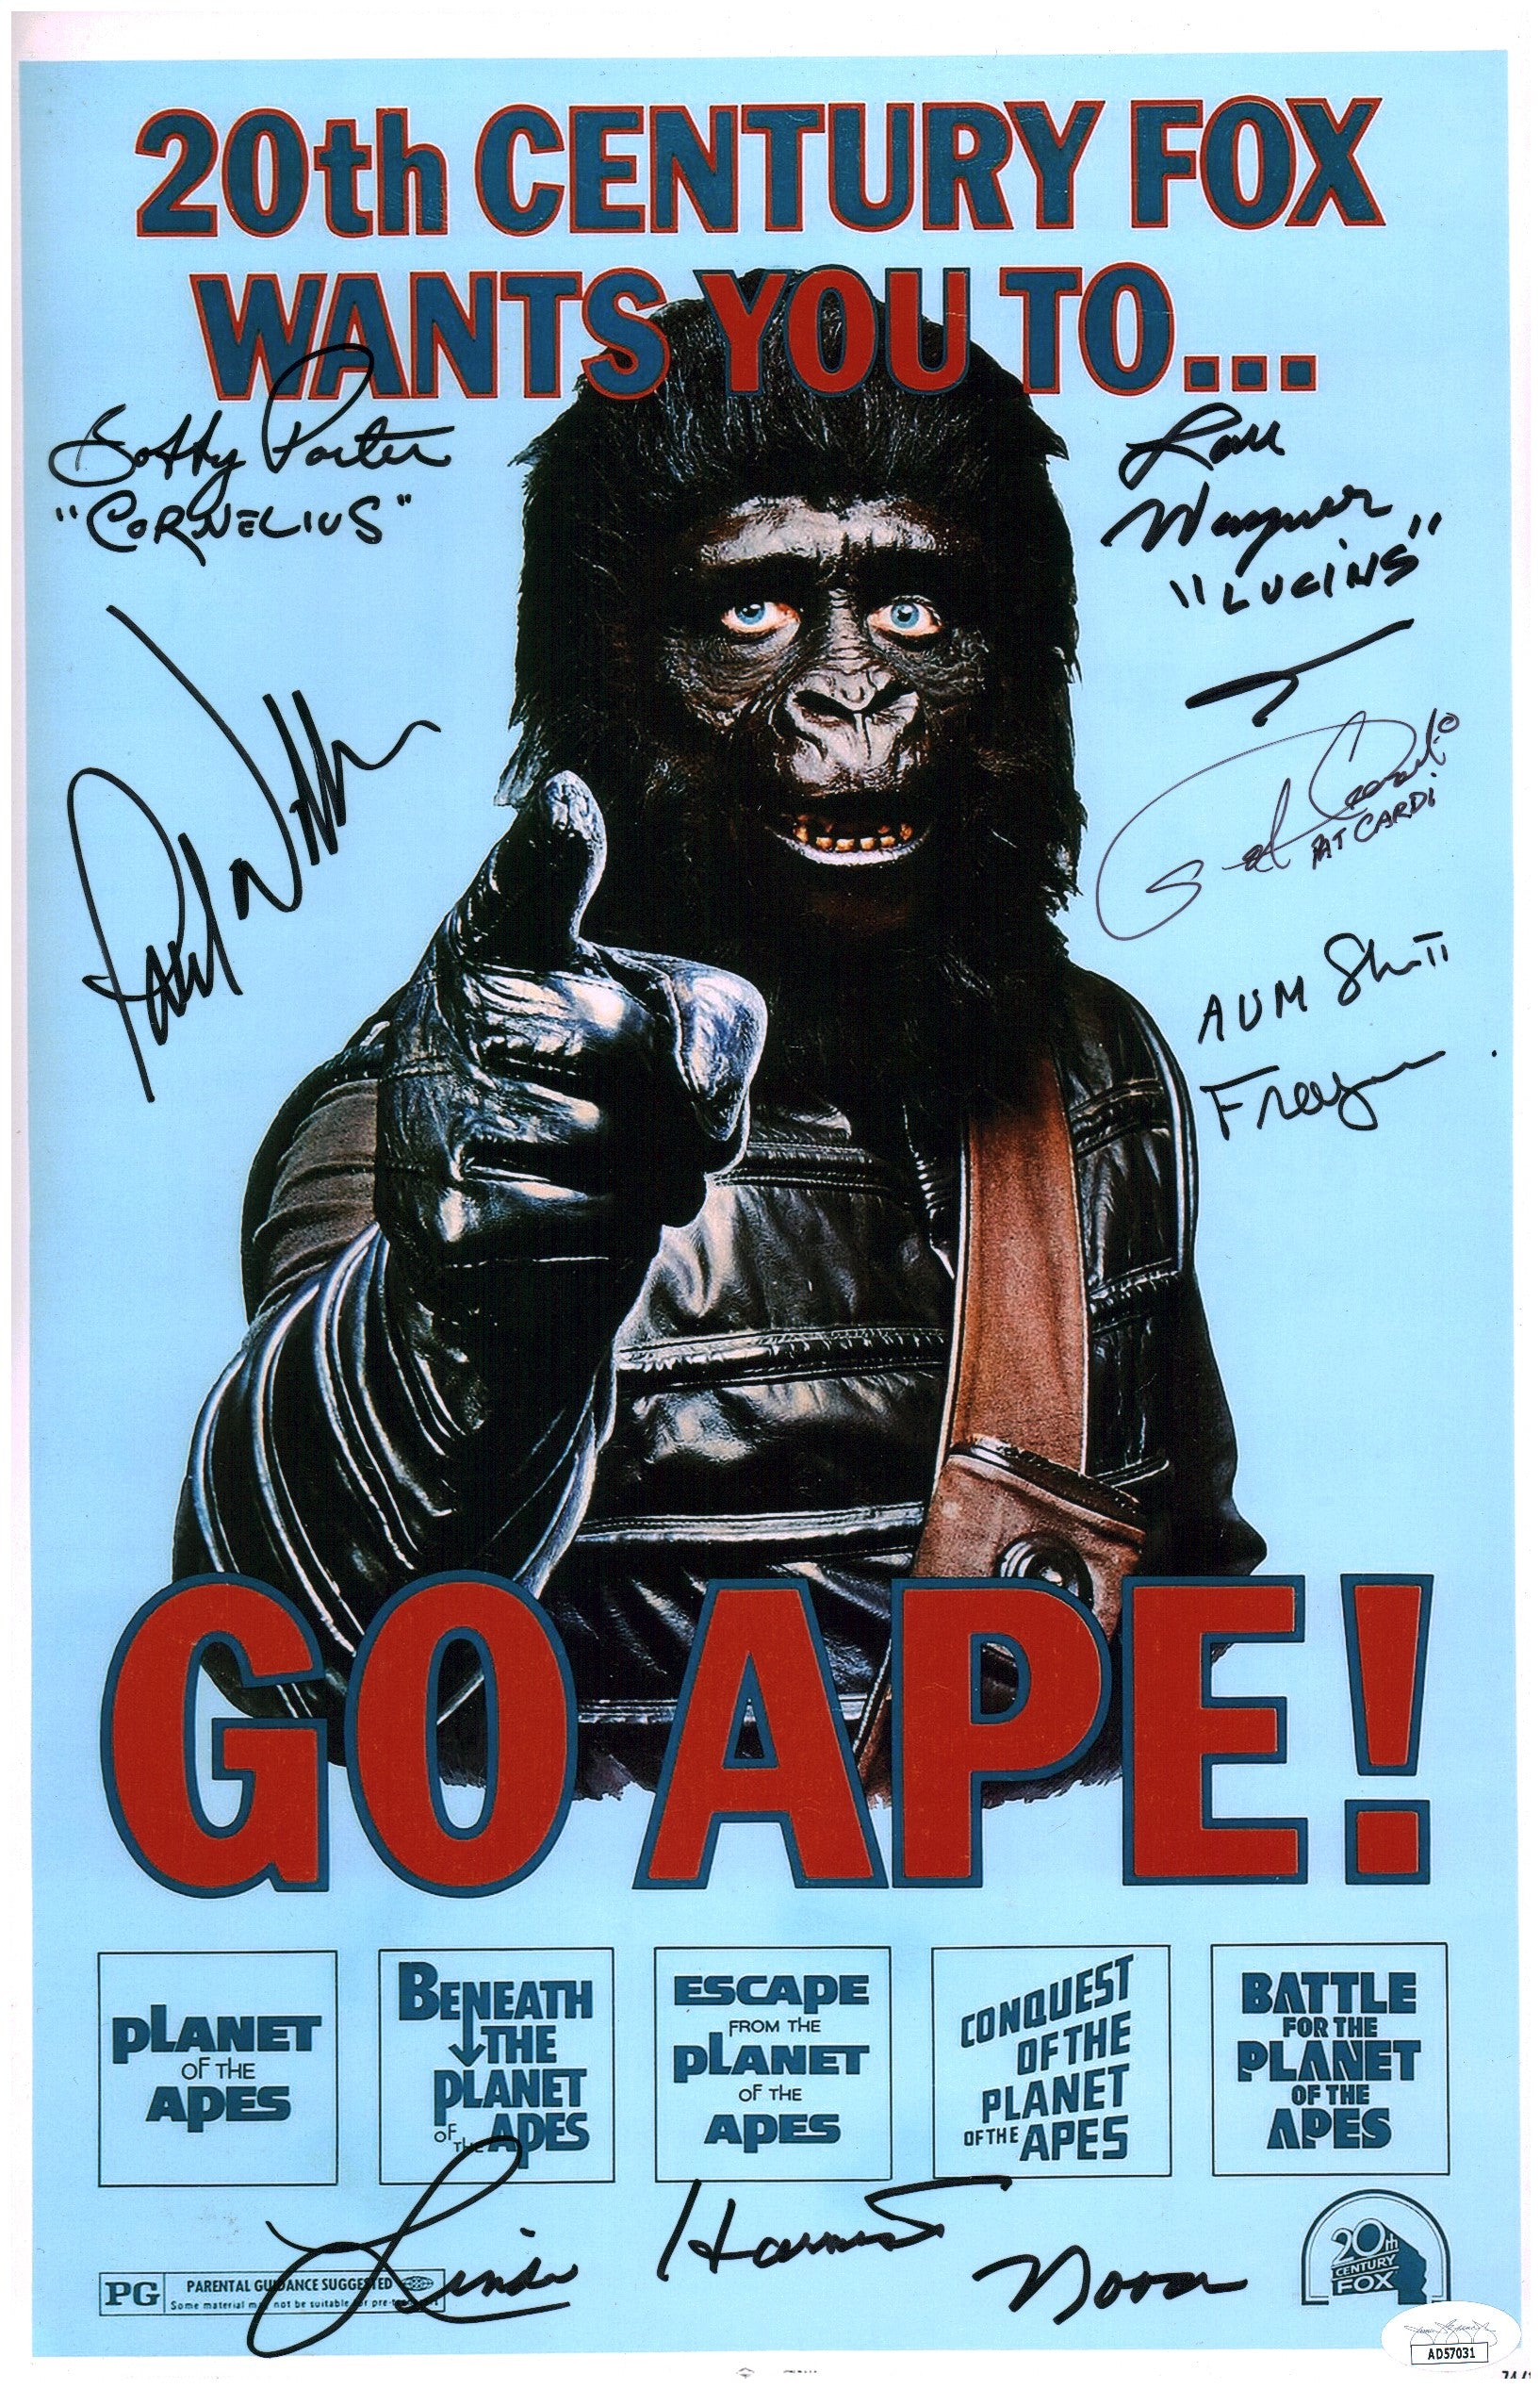 Planet of the Apes 11x17 Signed Photo Poster Harrison Cardi Porter Wagner Williams Nuyen JSA COA Certified Autograph